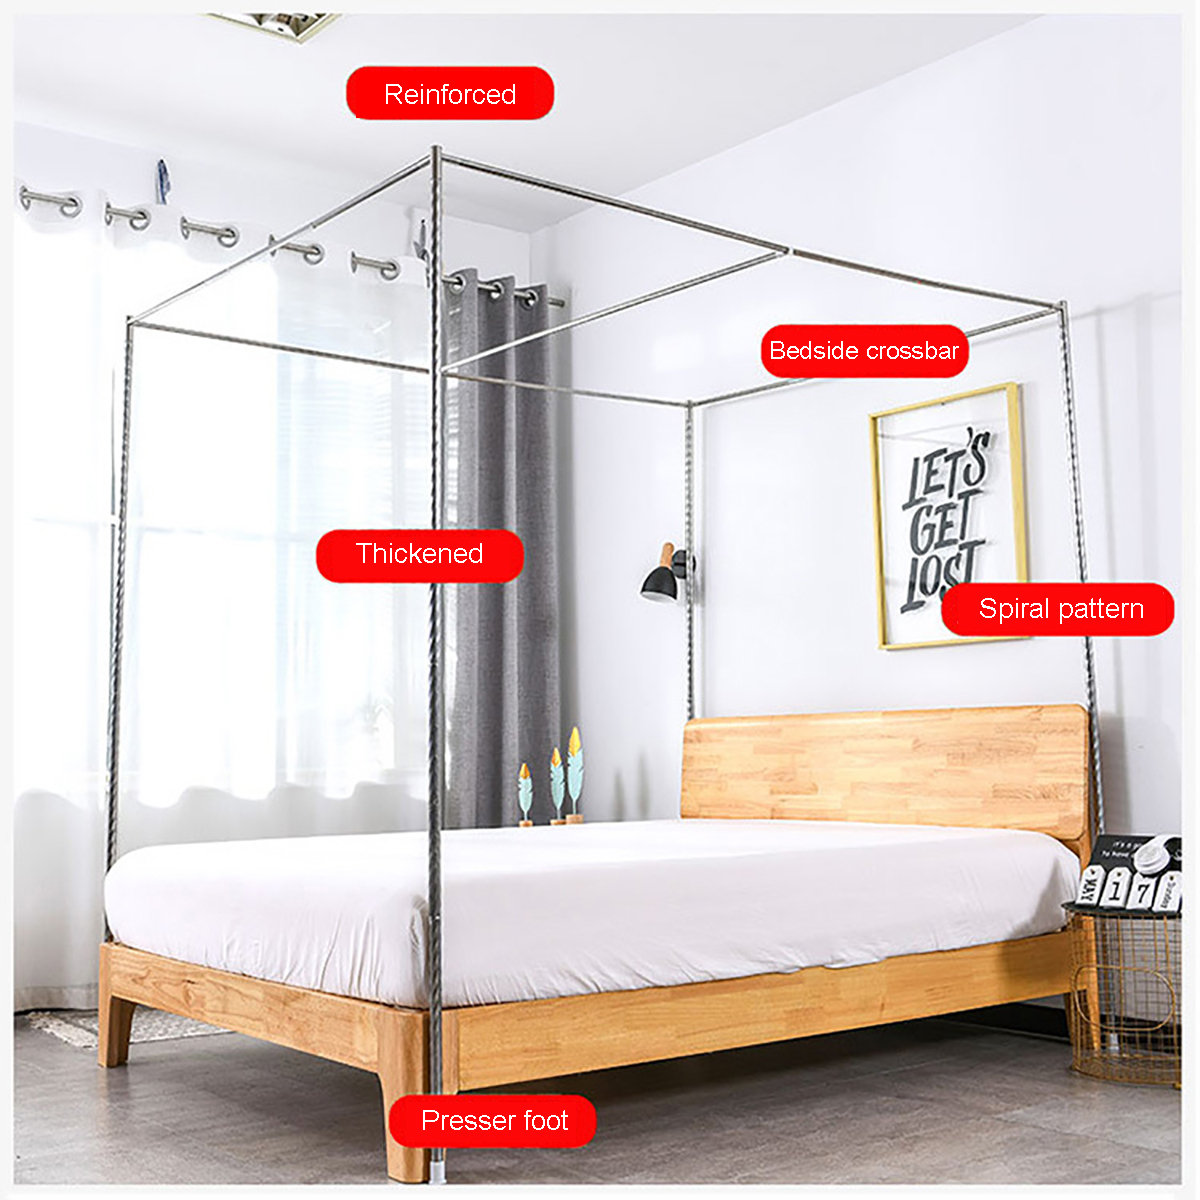 Stainless-Steel-Bed-Mosquito-Canopy-Nets-Bracket-Support-Frame-Post-Telescopic-1956267-3